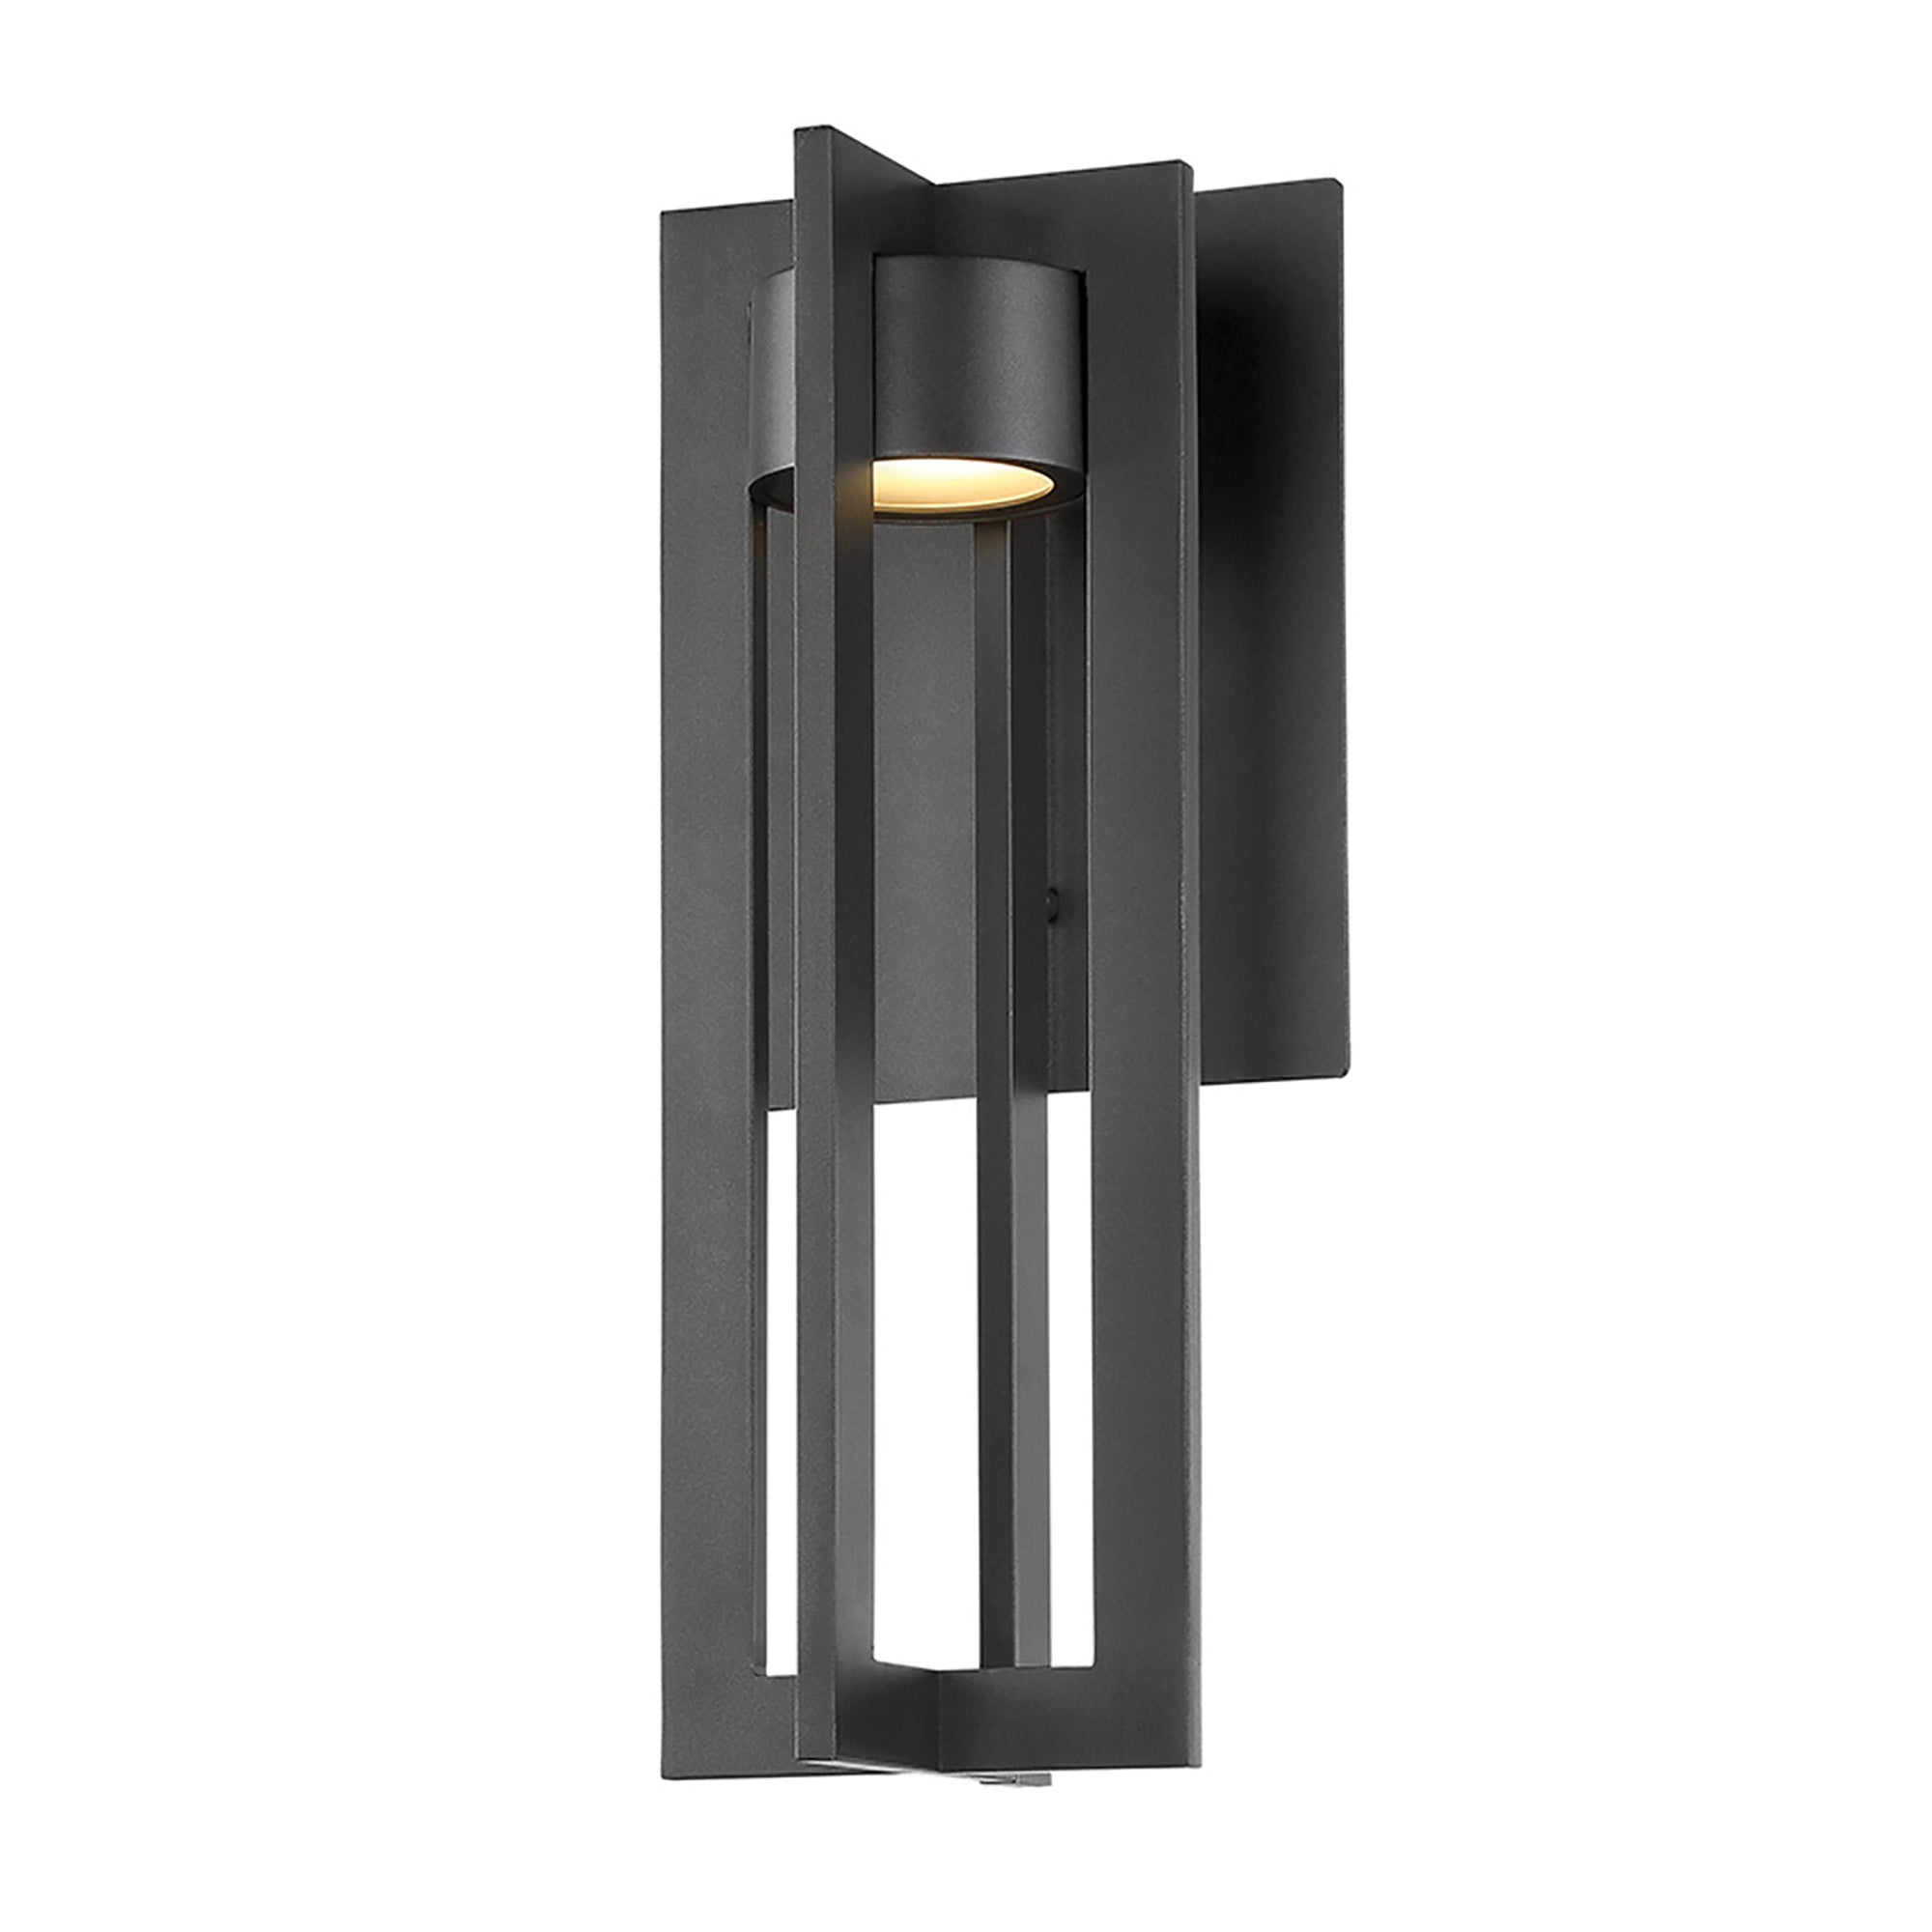 Chamber 15.8" LED Indoor/Outdoor Wall Light